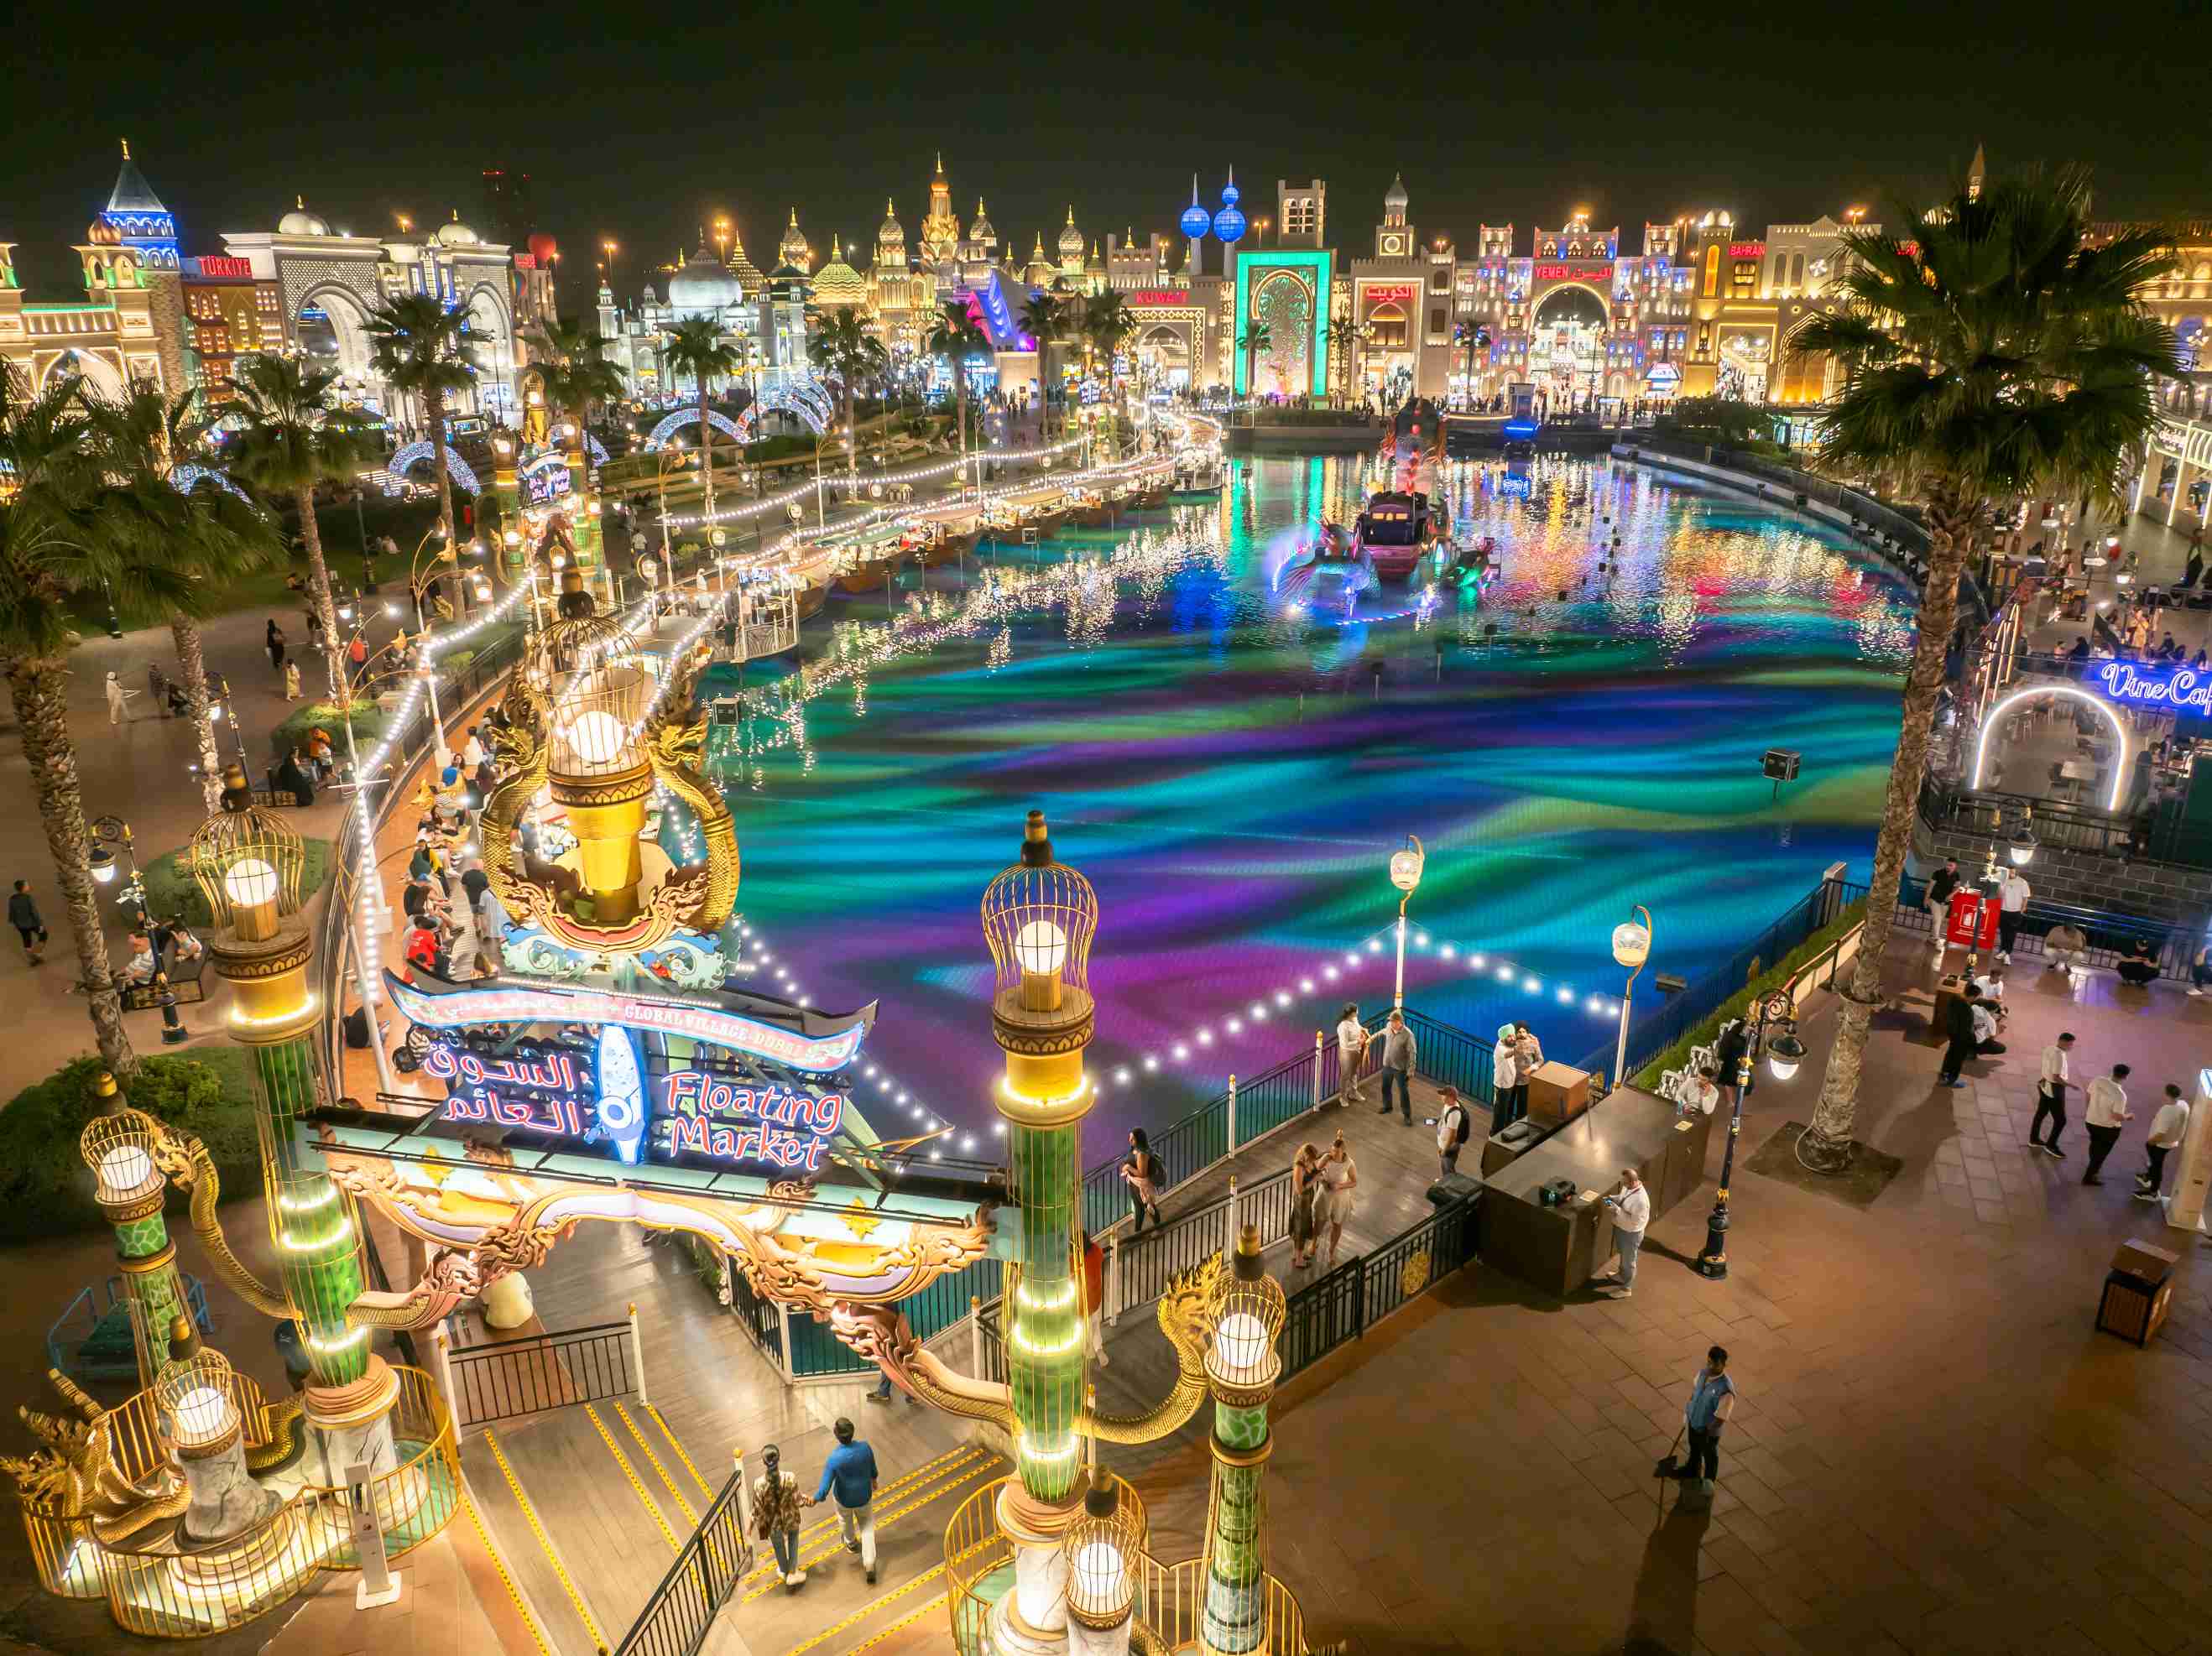 global village's season 28 sets a new record with 10 million visitors